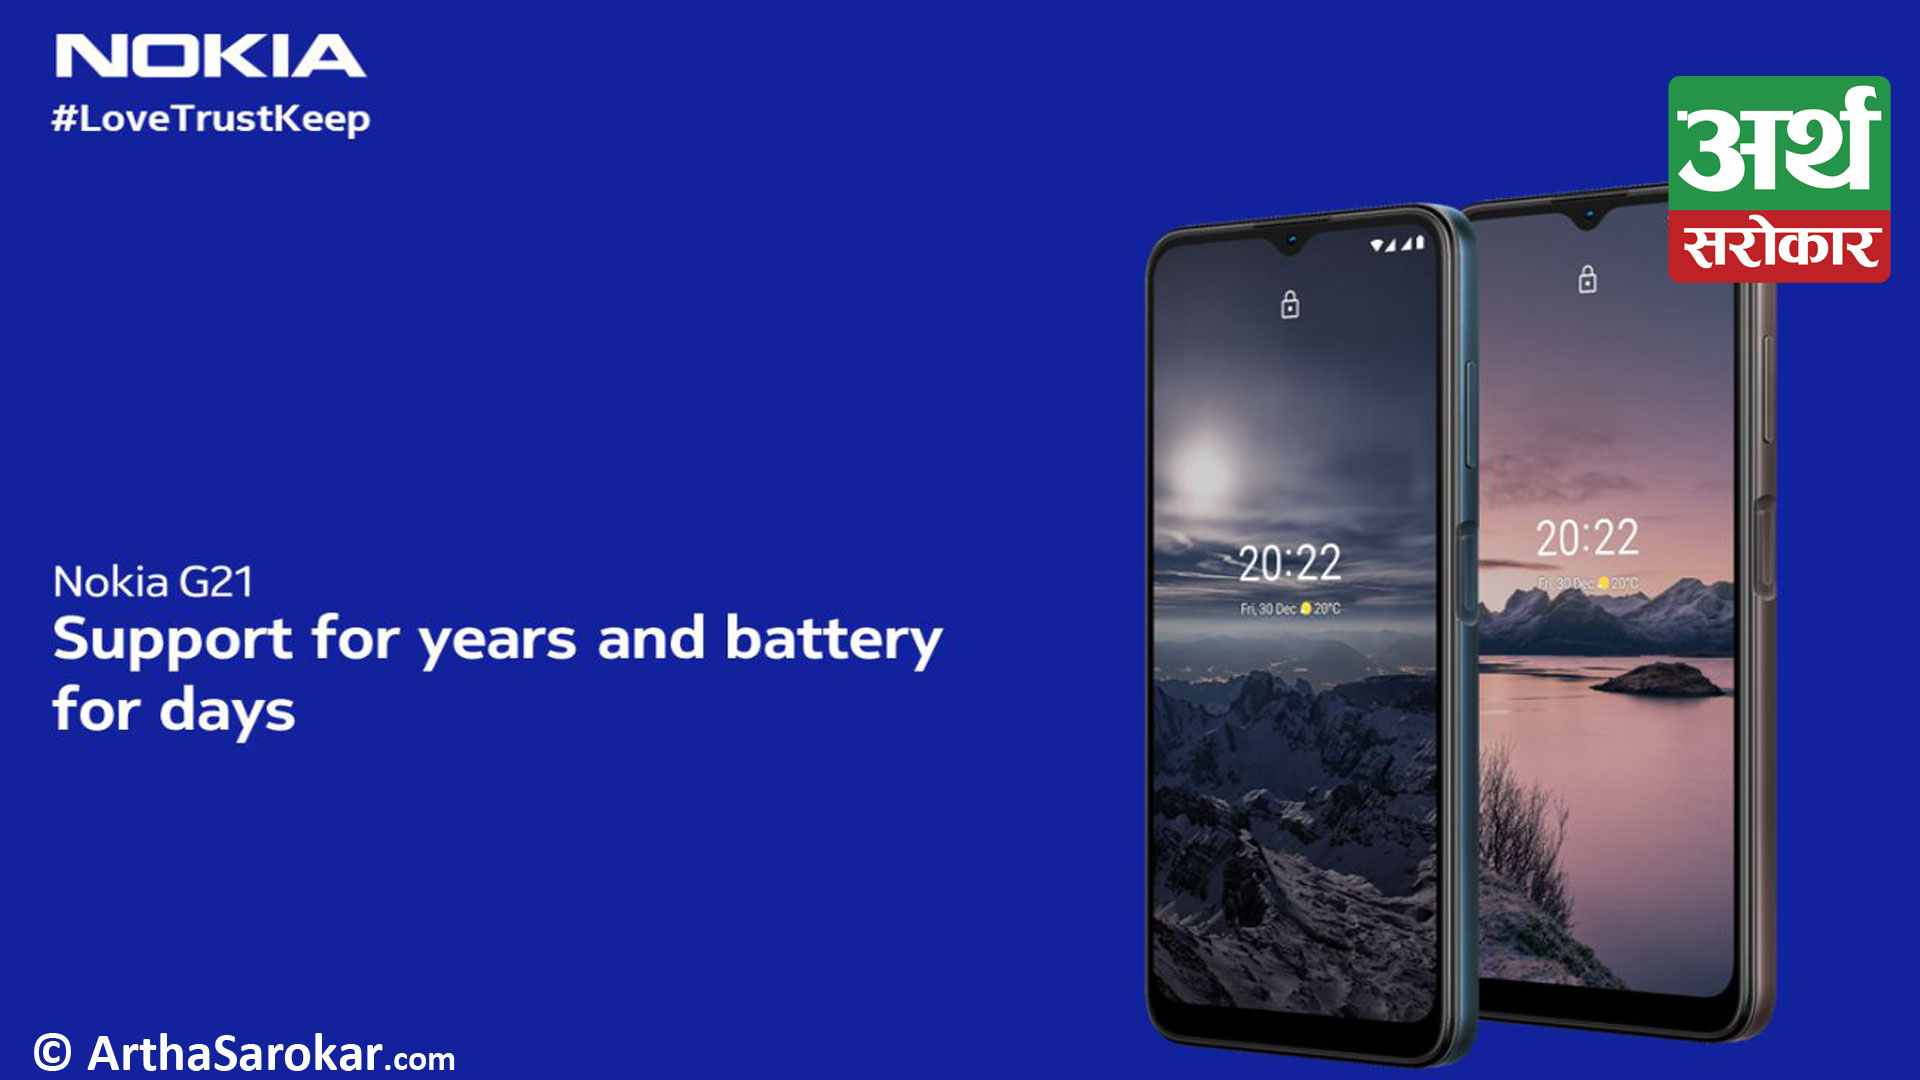 Built to last longer : Nokia G21 combat low battery anxiety and receive twice as many security updates